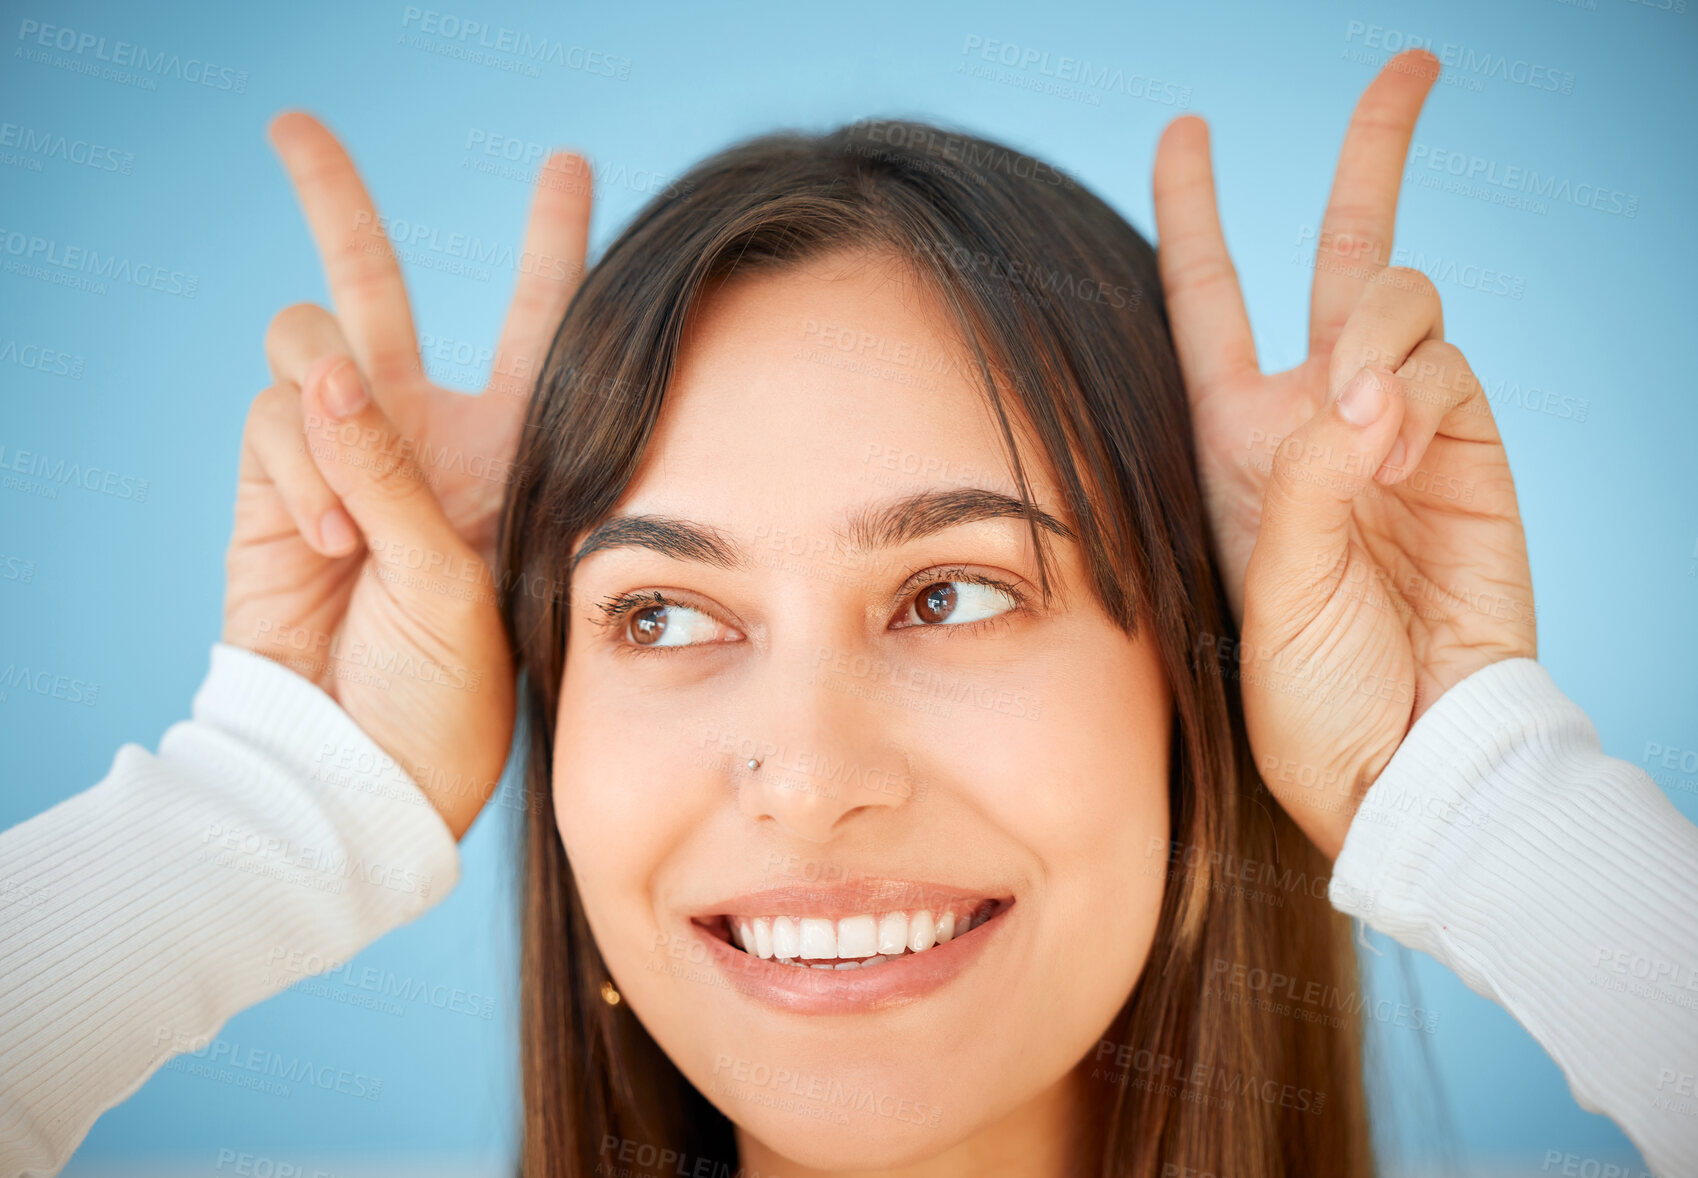 Buy stock photo Studio shot of a young woman showing the peace sign against a blue background